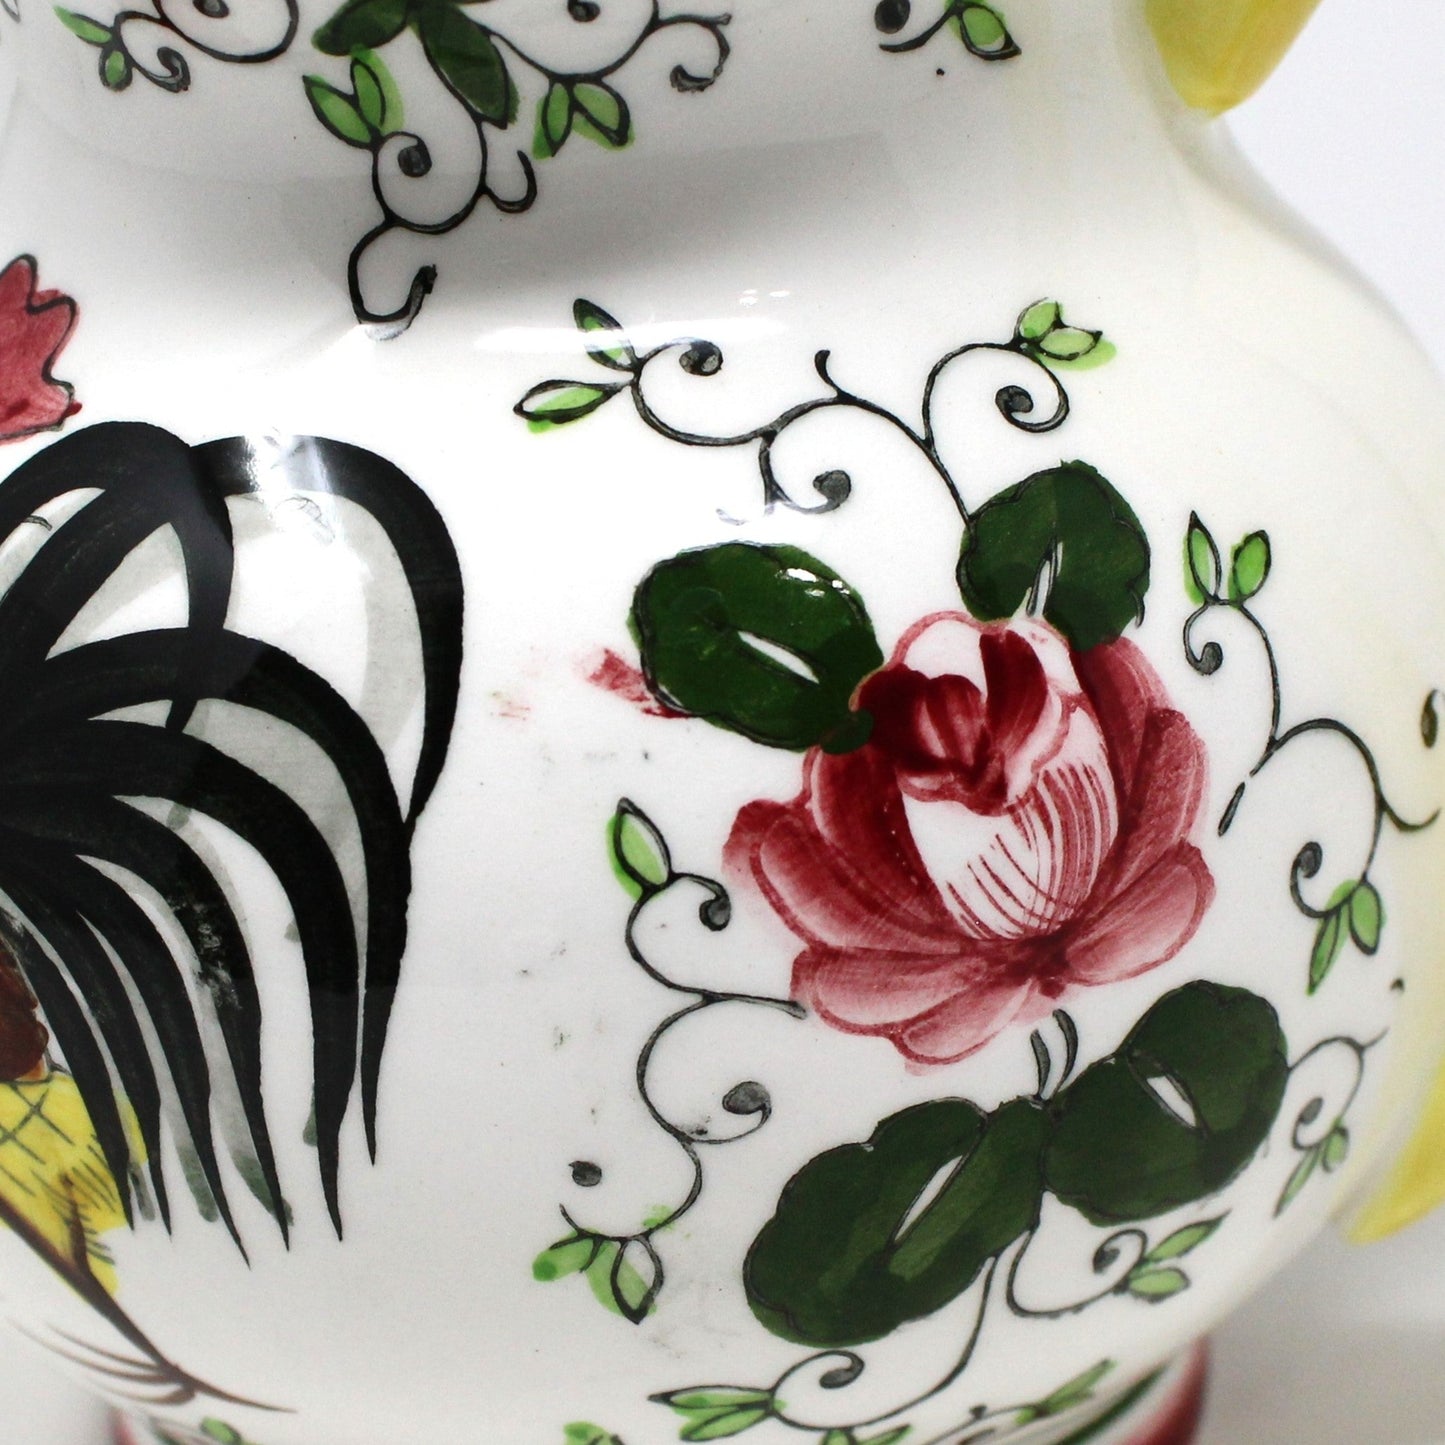 Pitcher, Ucagco, Early Provincial, Rooster & Roses, Ceramic, Japan